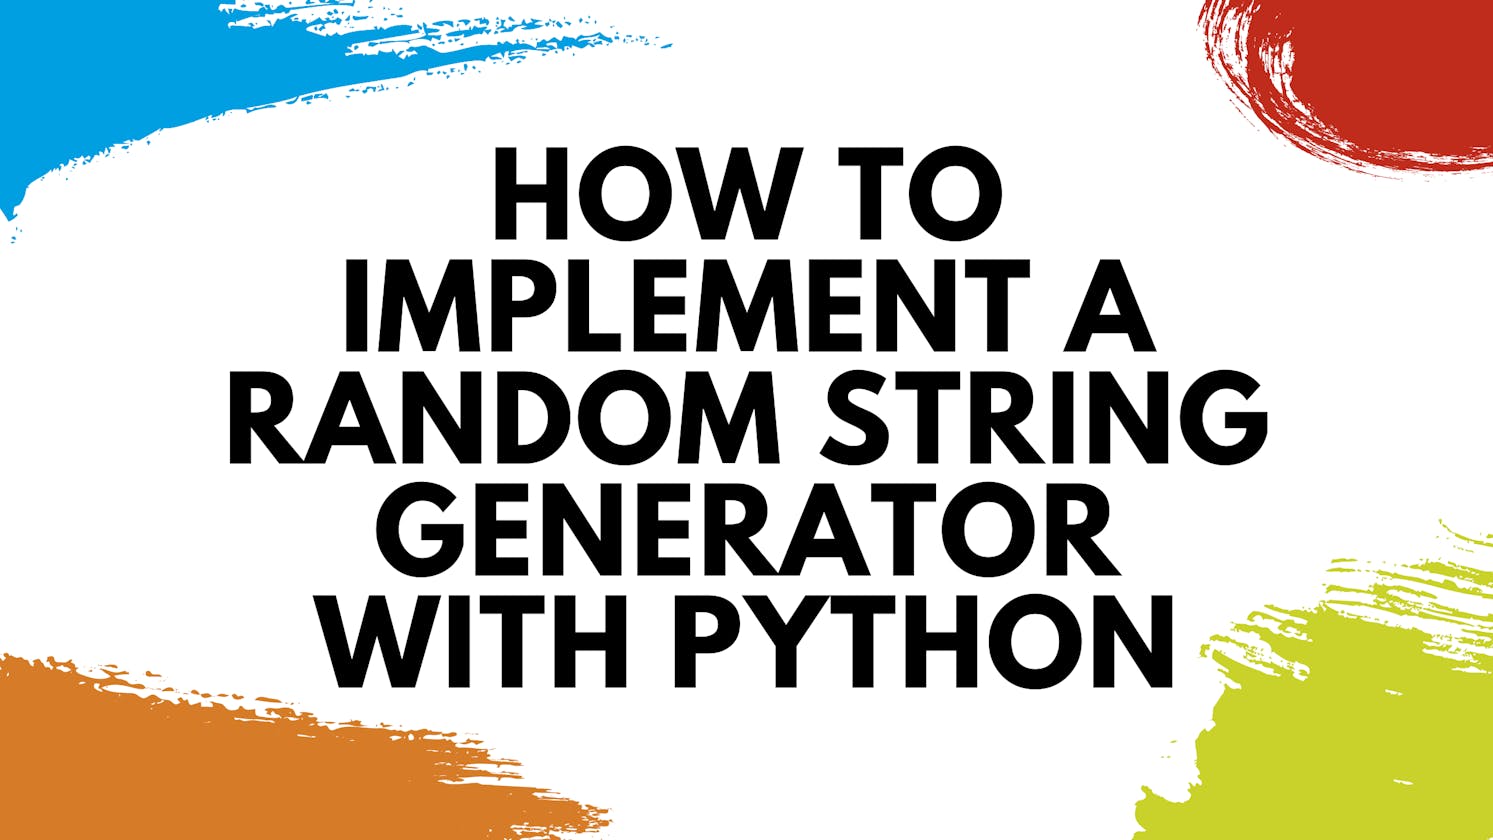 How To Implement A Random String Generator With Python